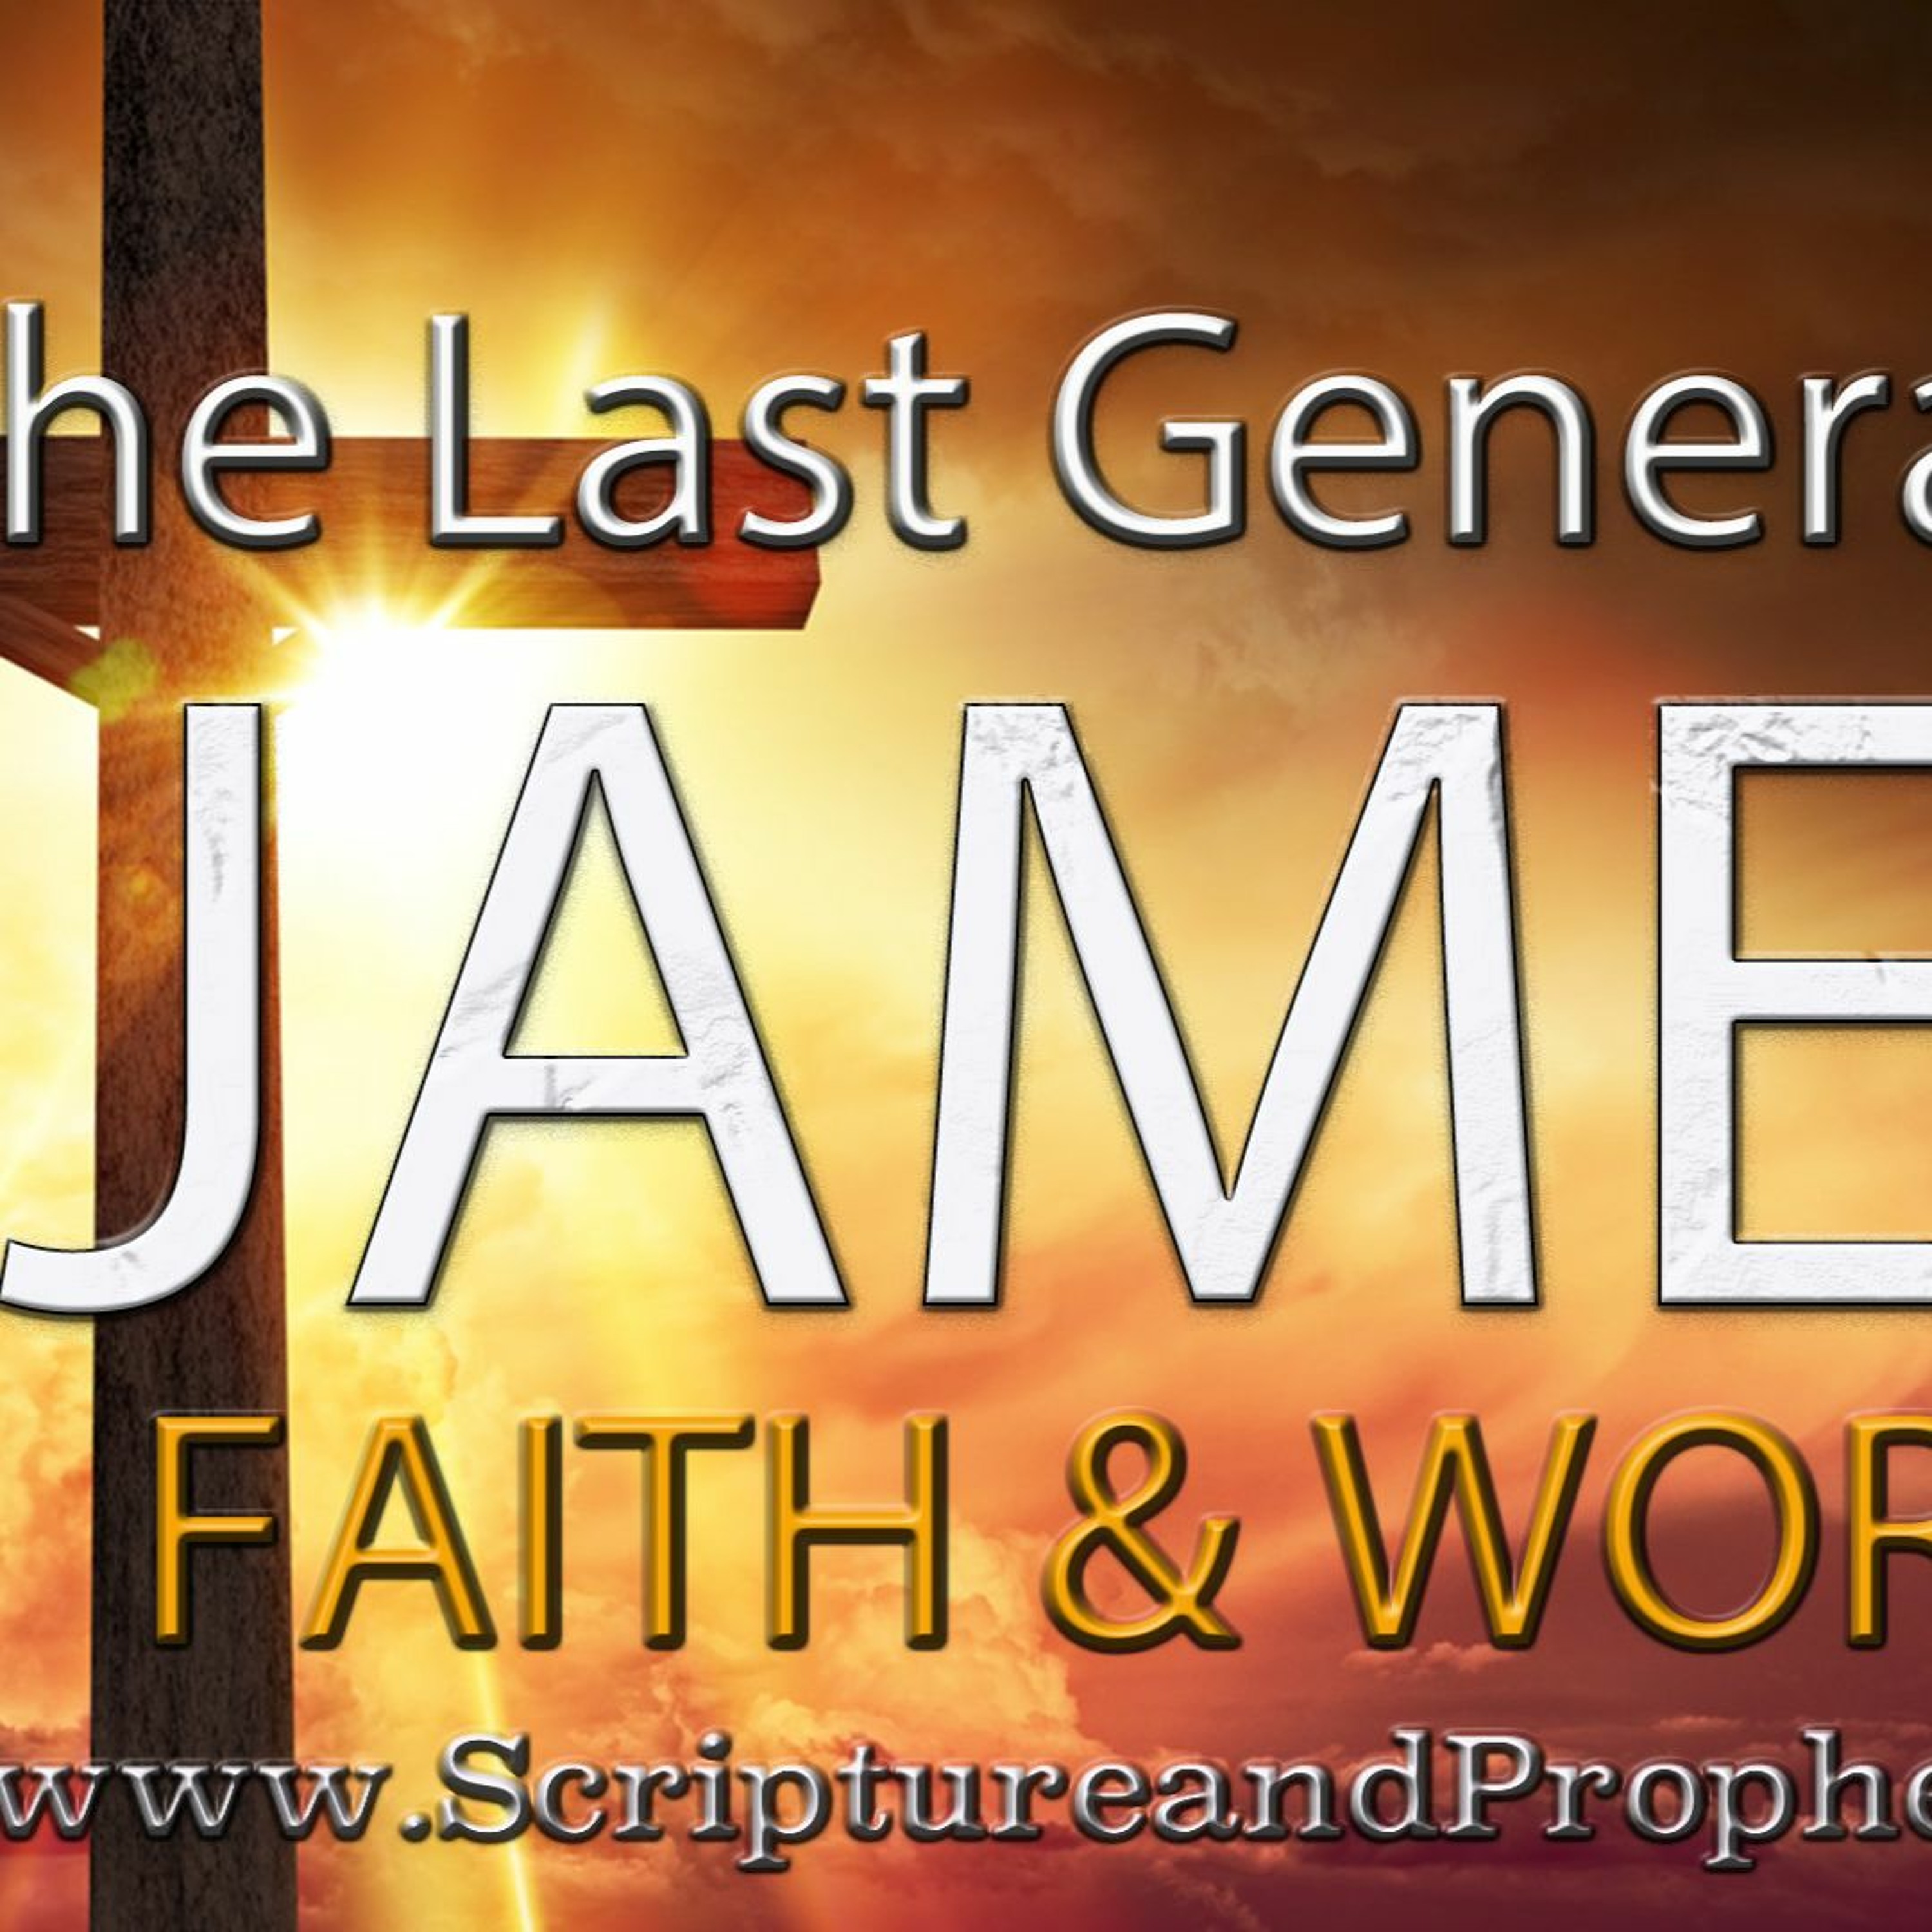 James - Faith & Works Chapter 1 - Don’t Be Deceived, Your Actions Matter